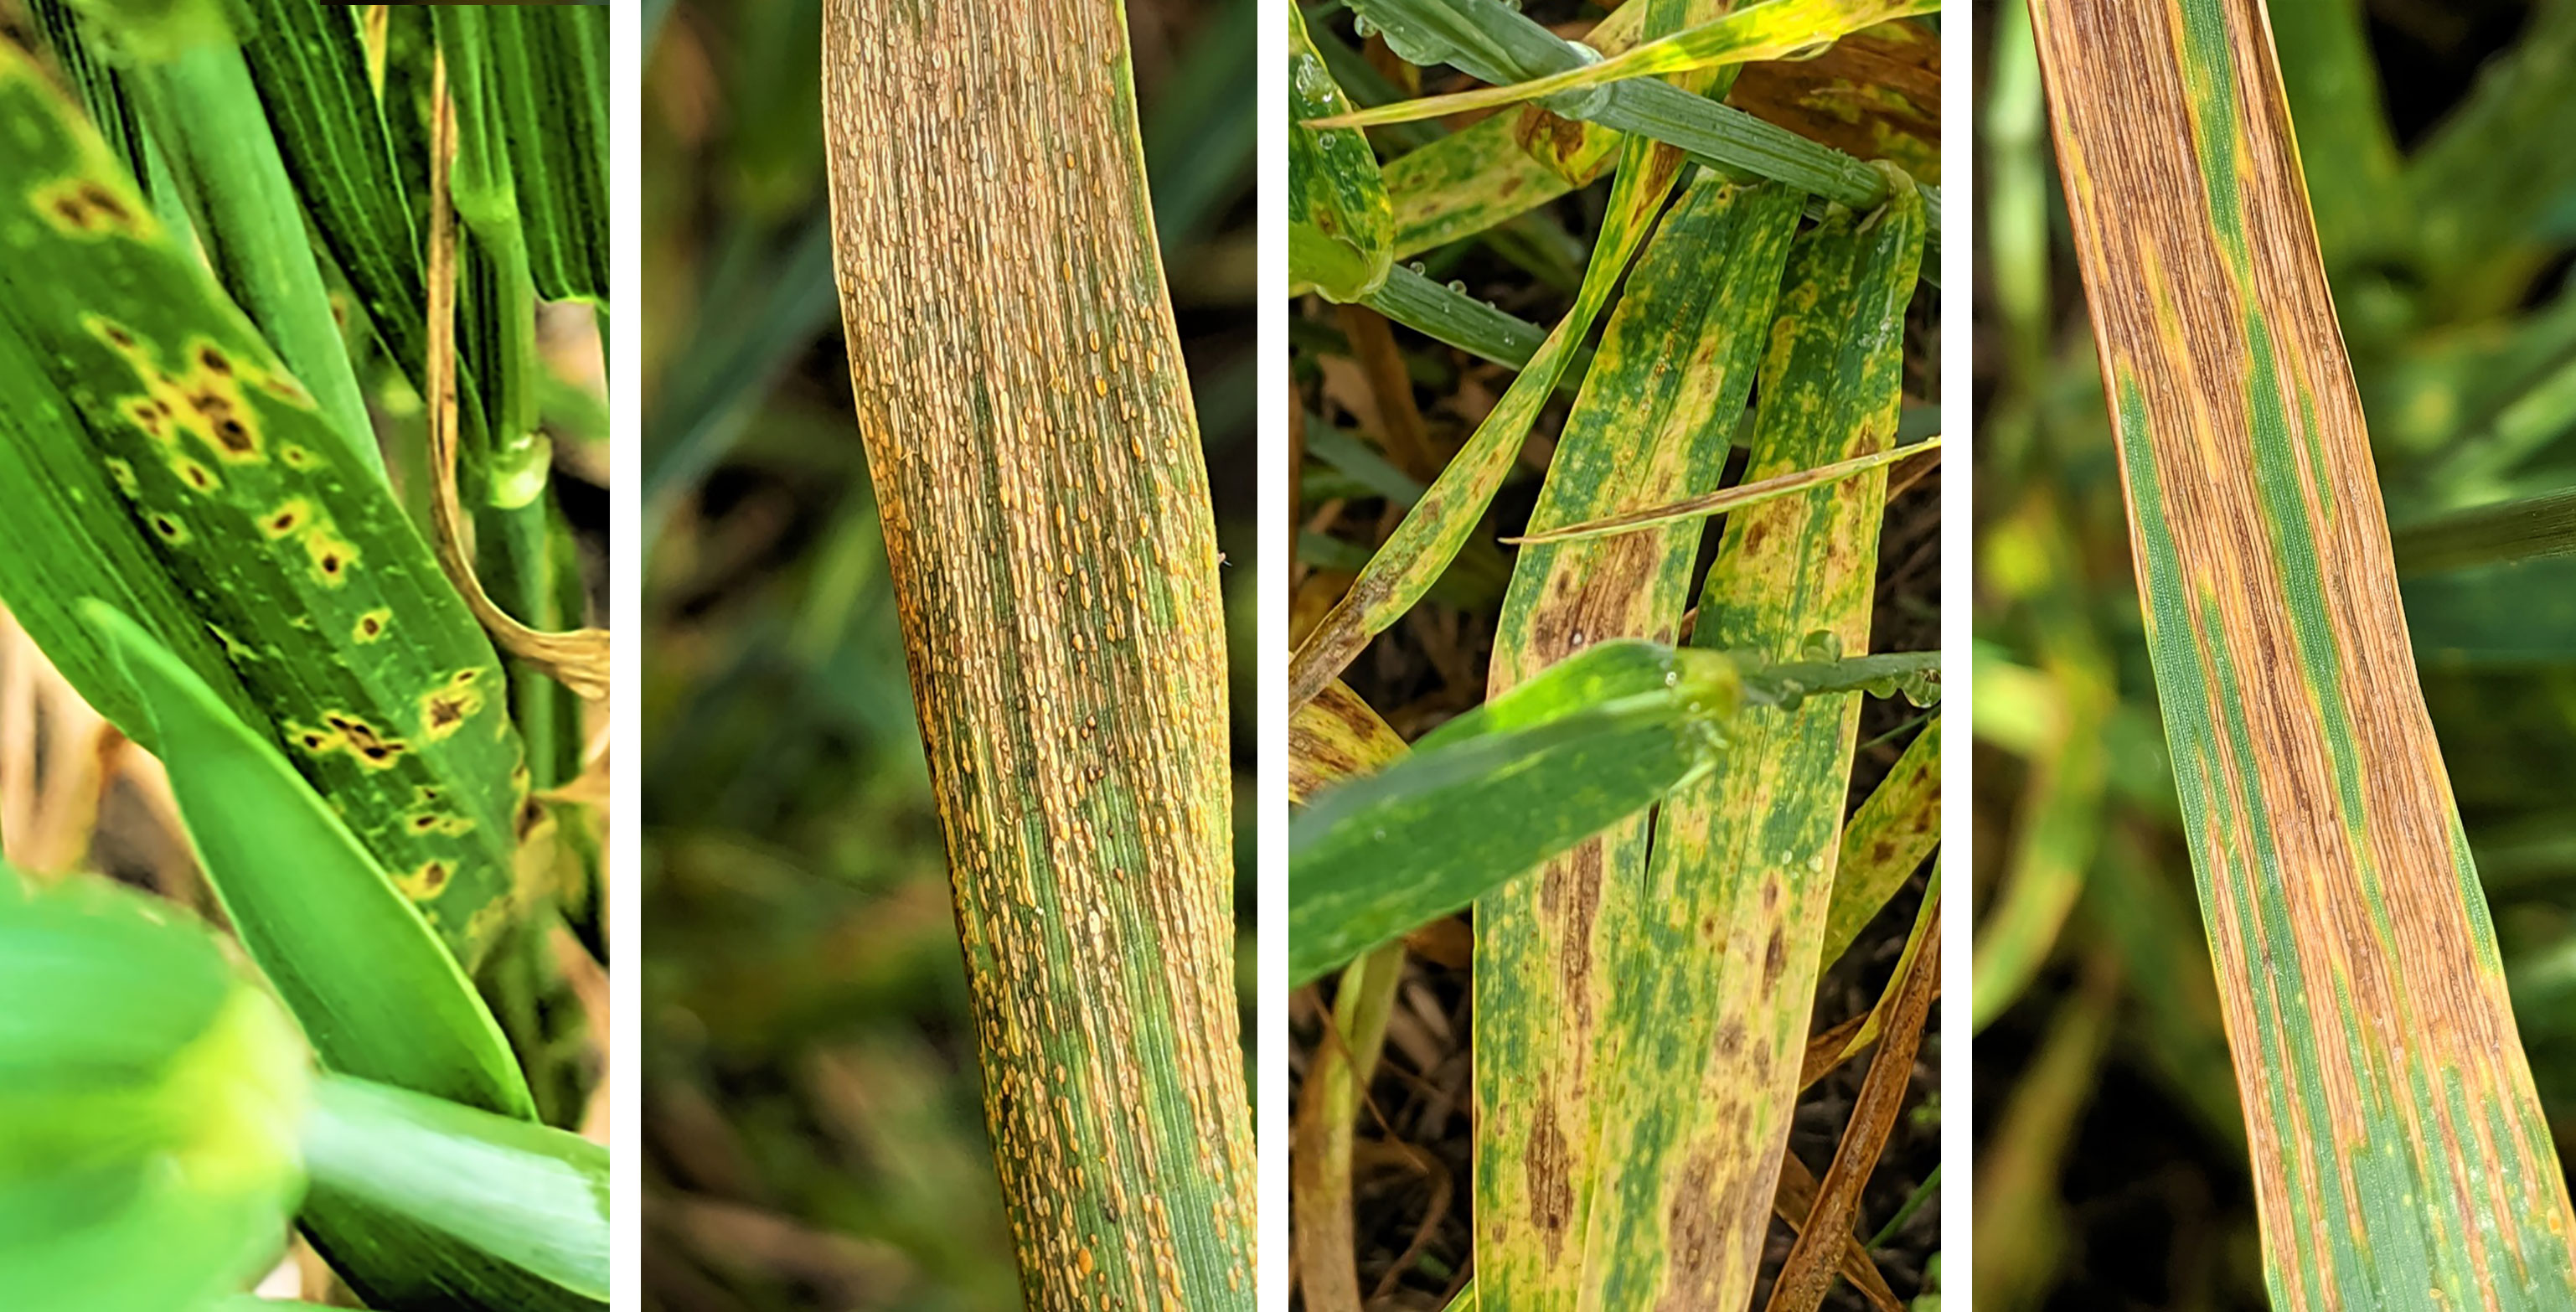 Collage of four common wheat disease symptoms. From left: Tan spot, strip rust, stagonospora leaf blotch, and bacterial leaf streak.